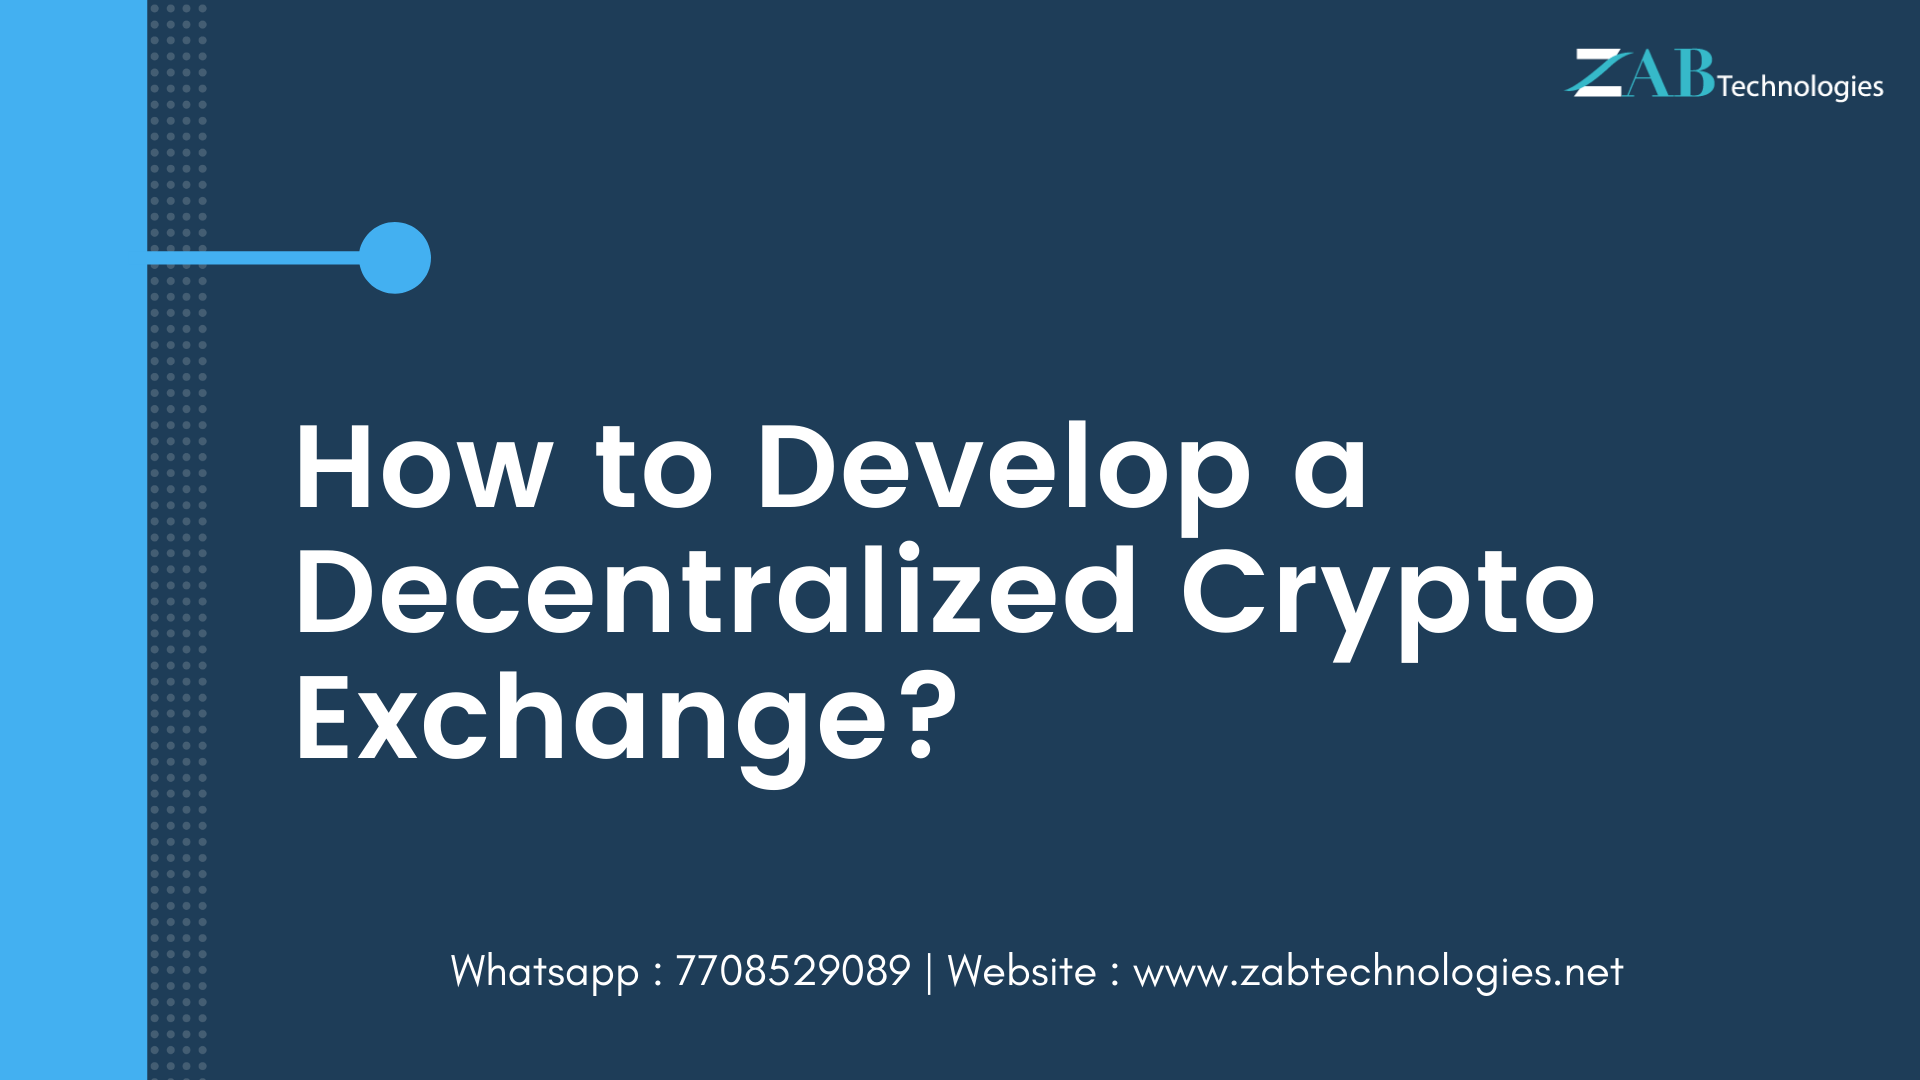 How to Develop a Decentralized Cryptocurrency Exchange 2021